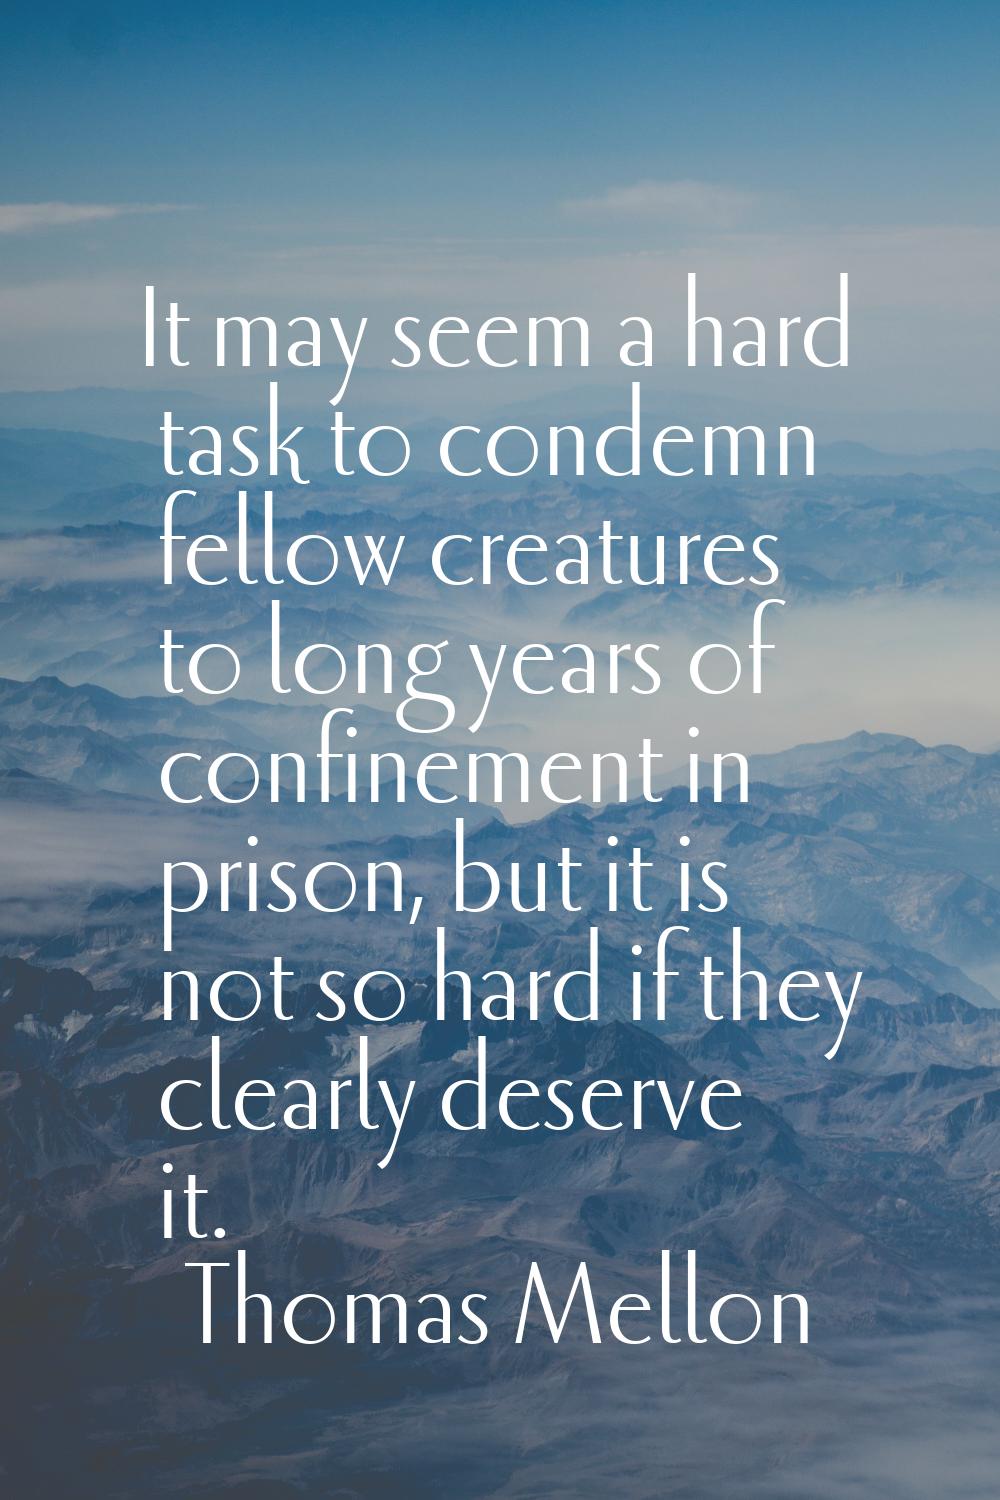 It may seem a hard task to condemn fellow creatures to long years of confinement in prison, but it 